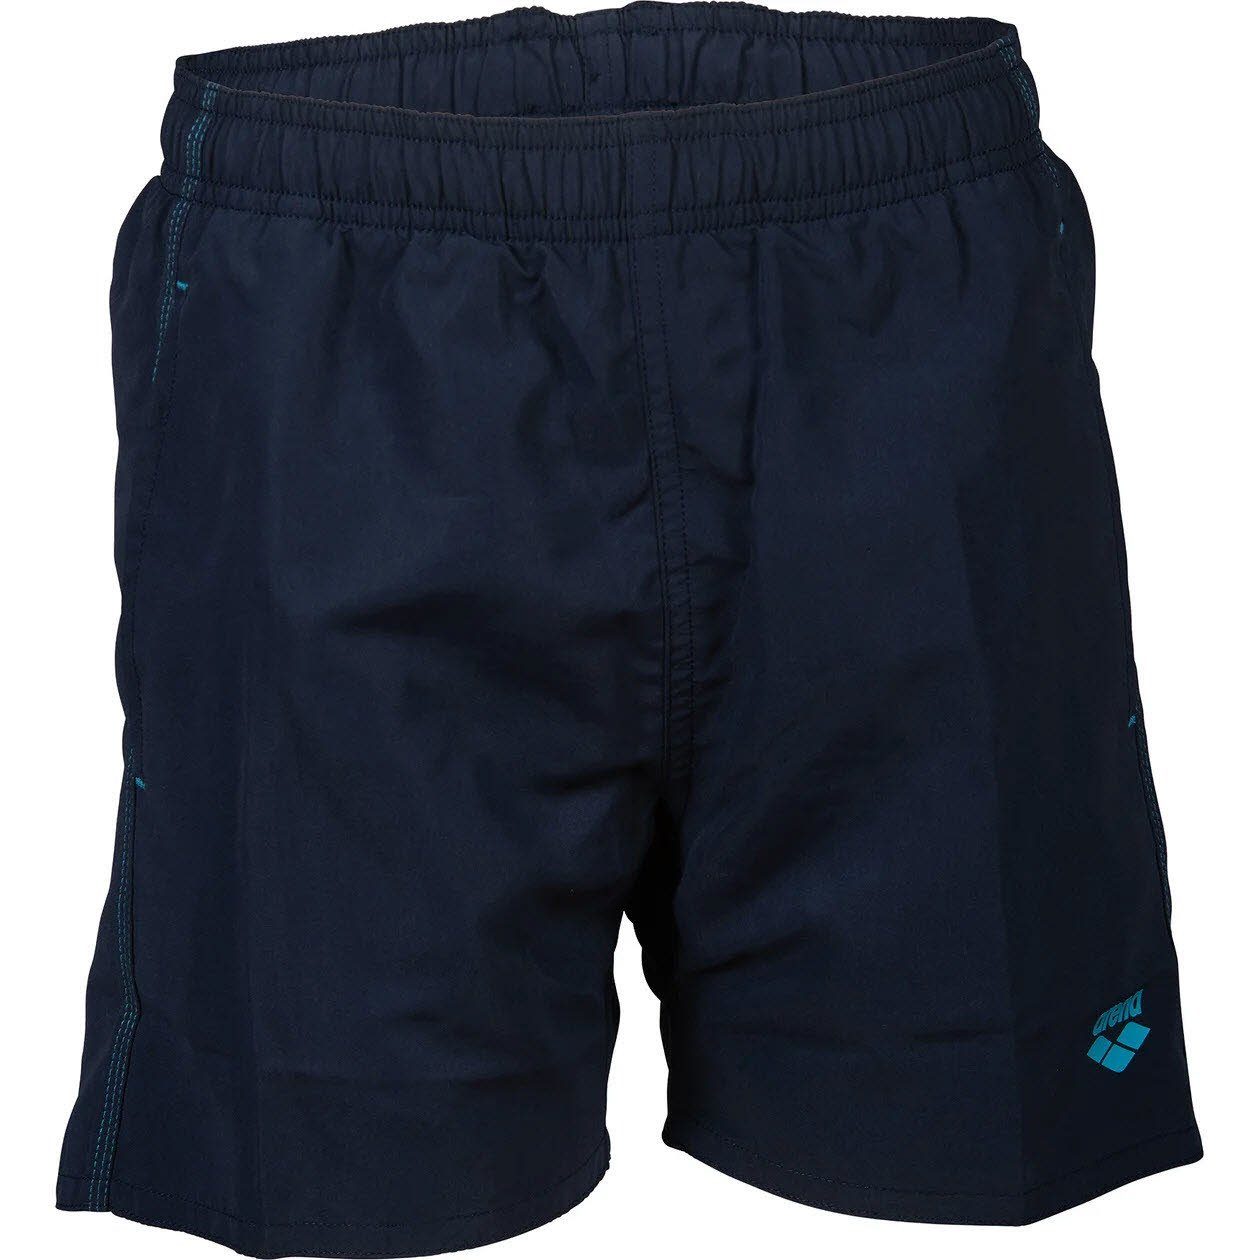 Arena Badeshorts BOYS' BEACH BOXER SOLID R 781 NAVY-TURQUOISE